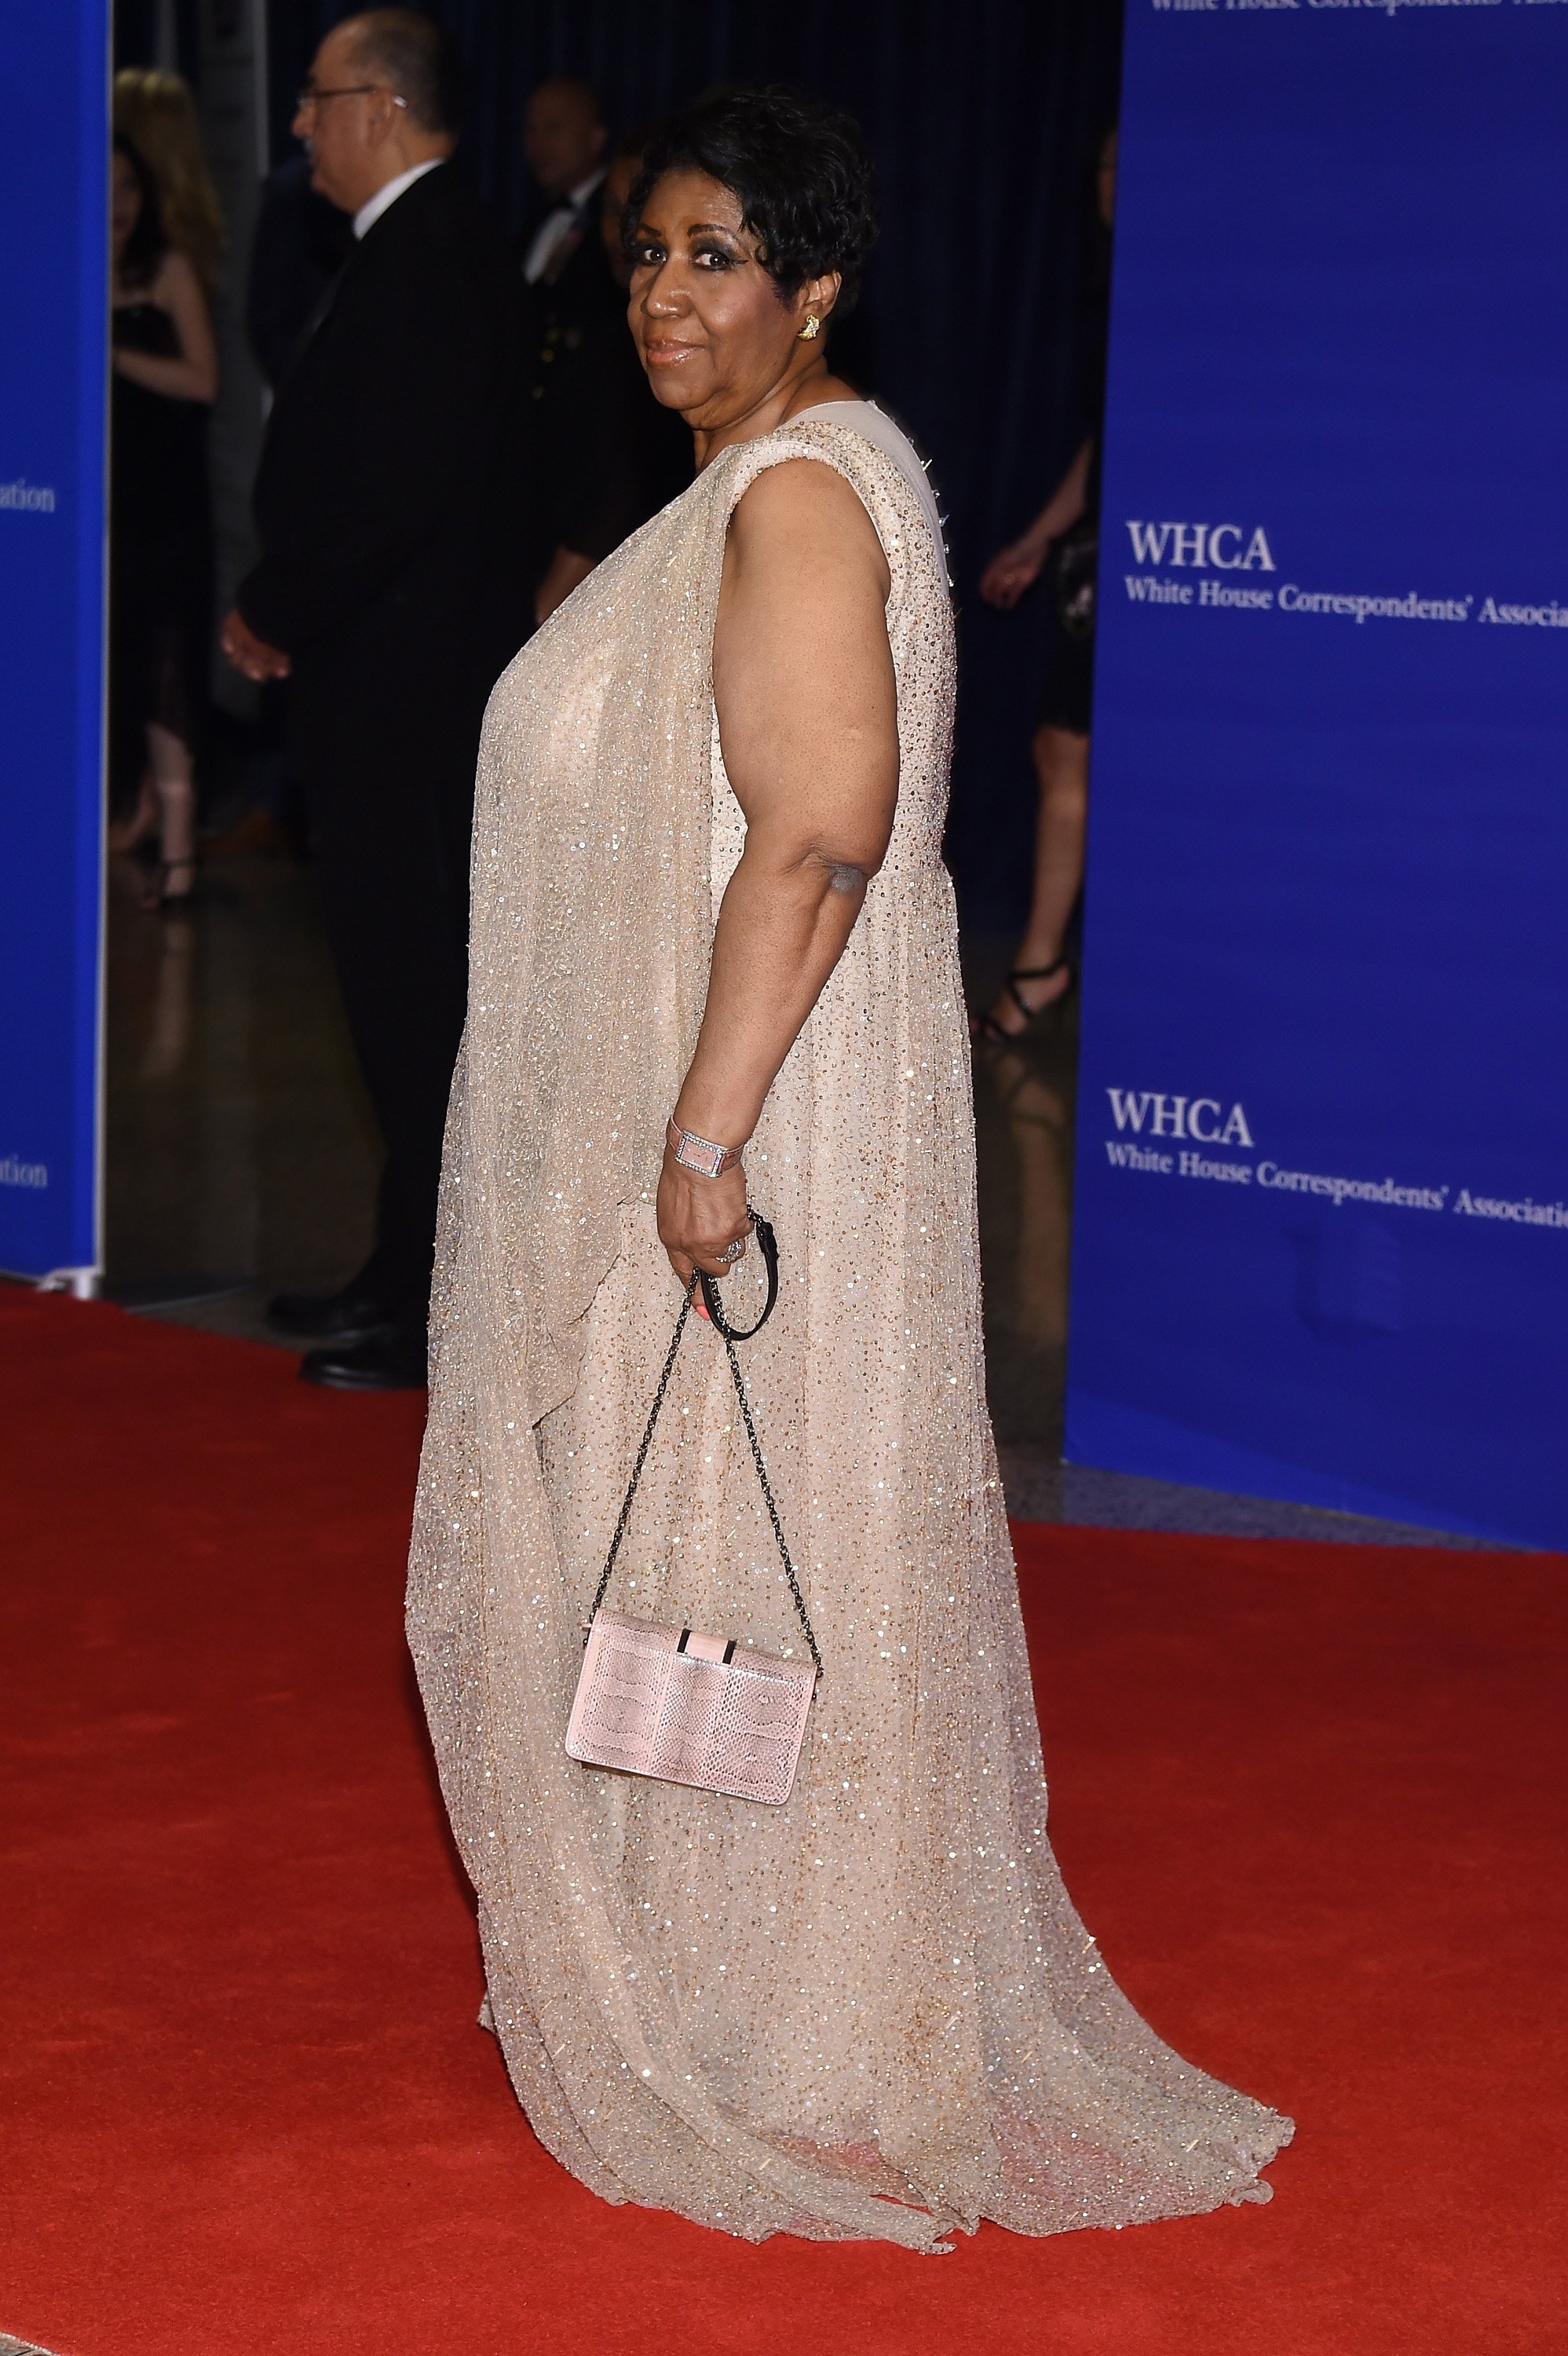 Aretha Franklin attends the White House Correspondents' Association Dinner at the Washington Hilton Hotel in Washington on April 30, 2016.